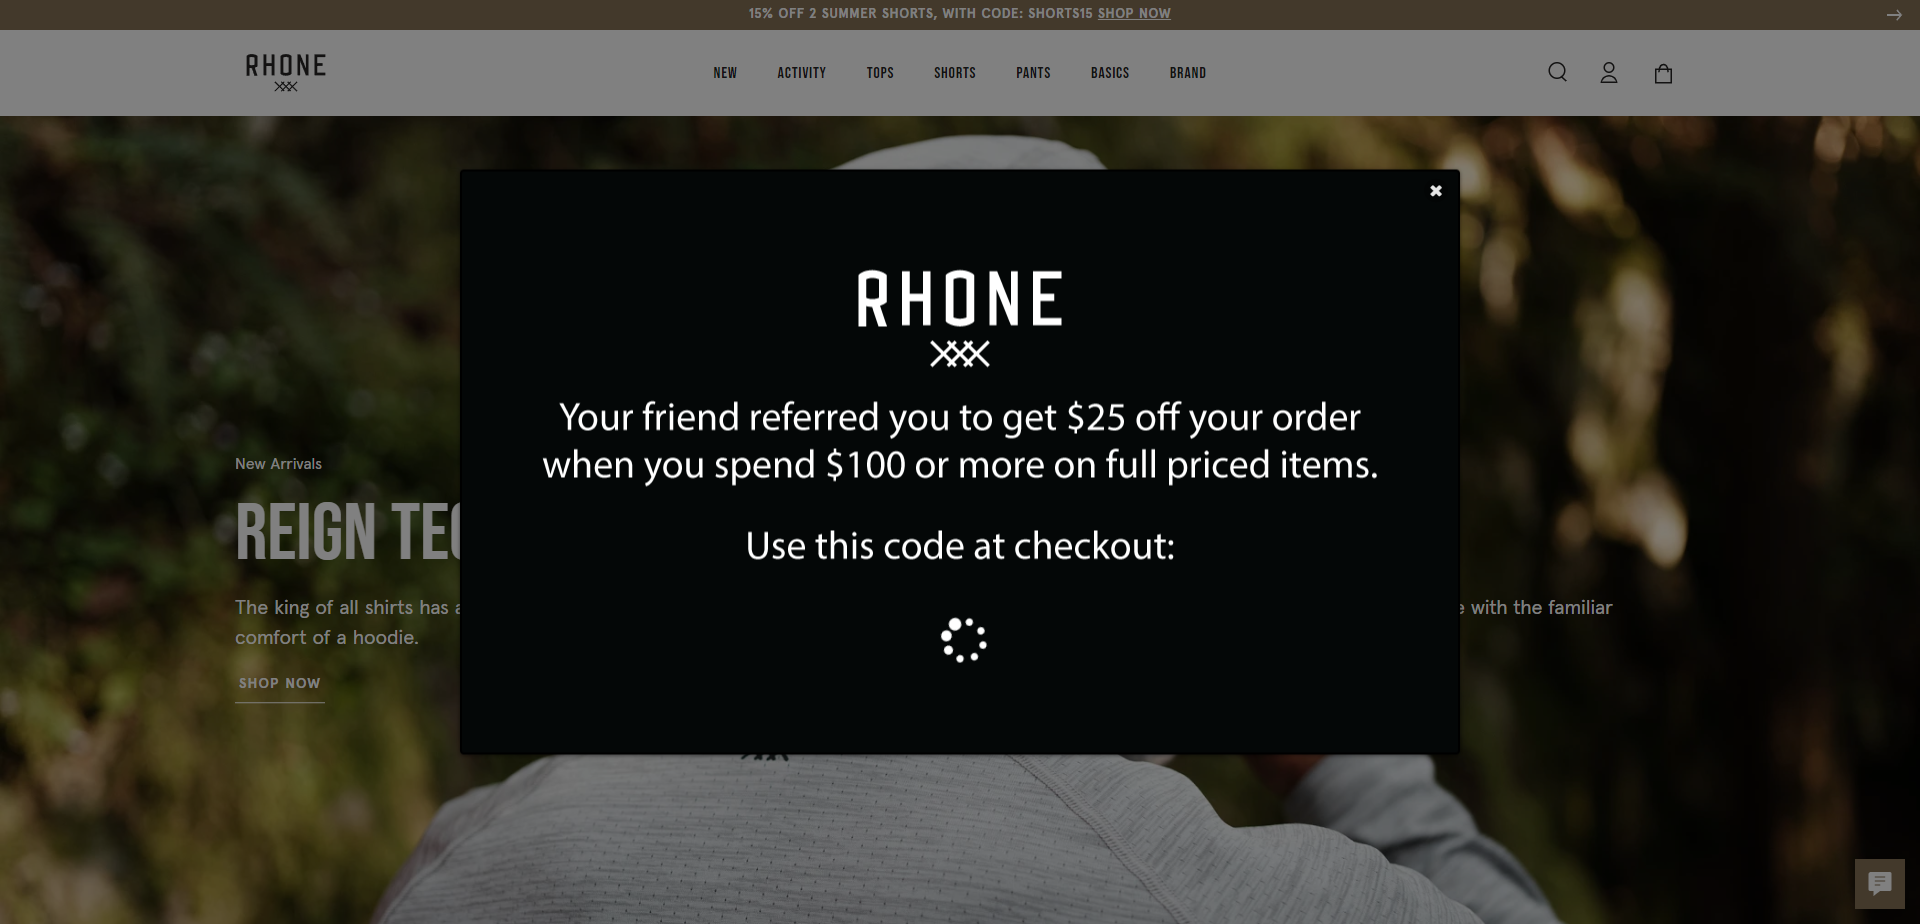 Referral Landing Page for Rhone